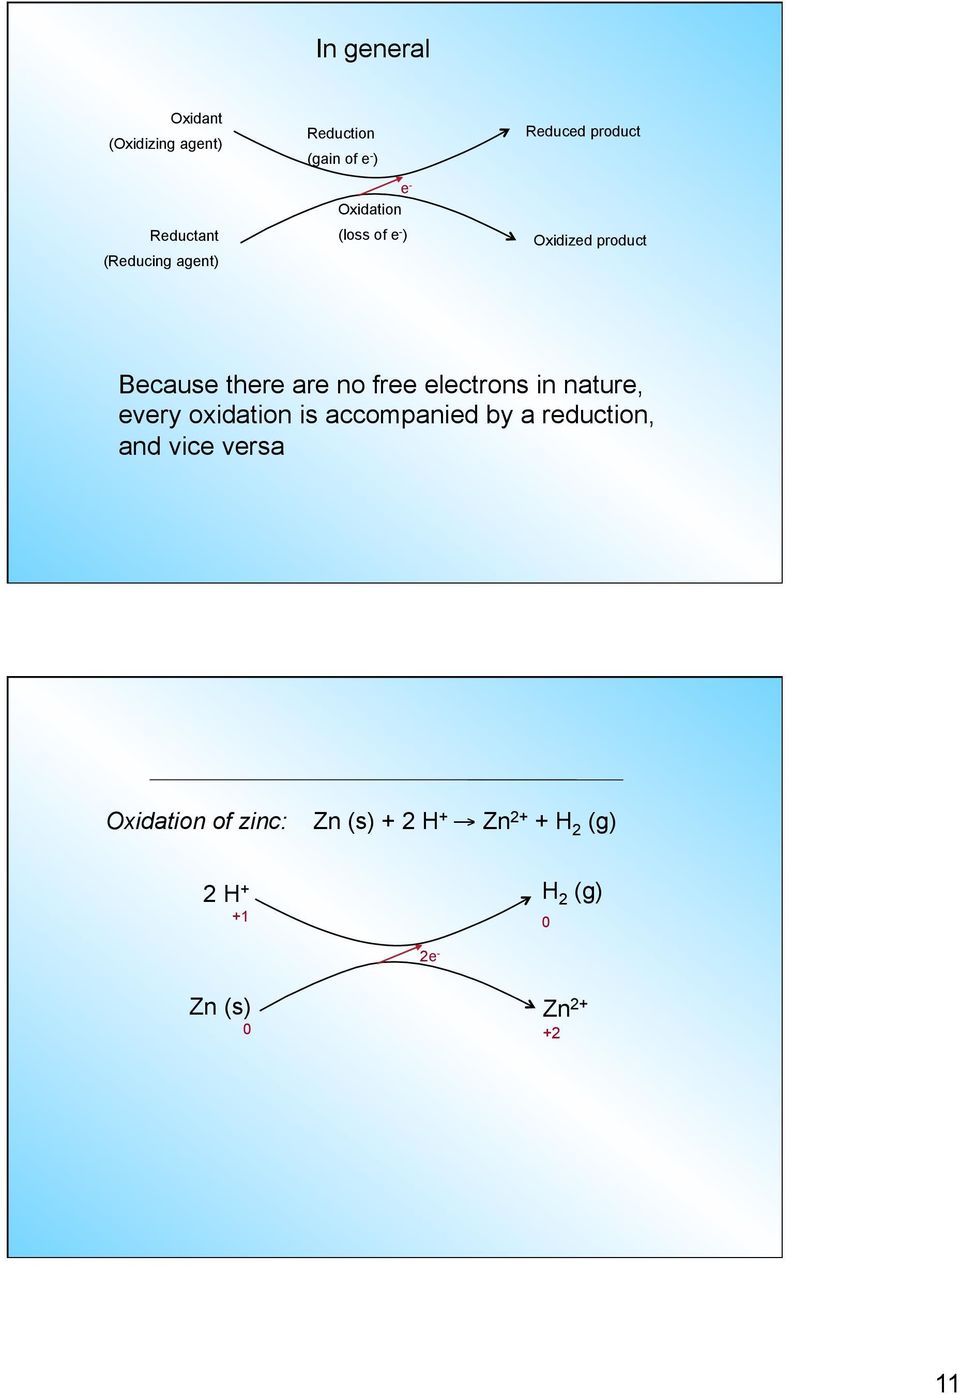 electrons in nature, every oxidation is accompanied by a reduction, and vice versa